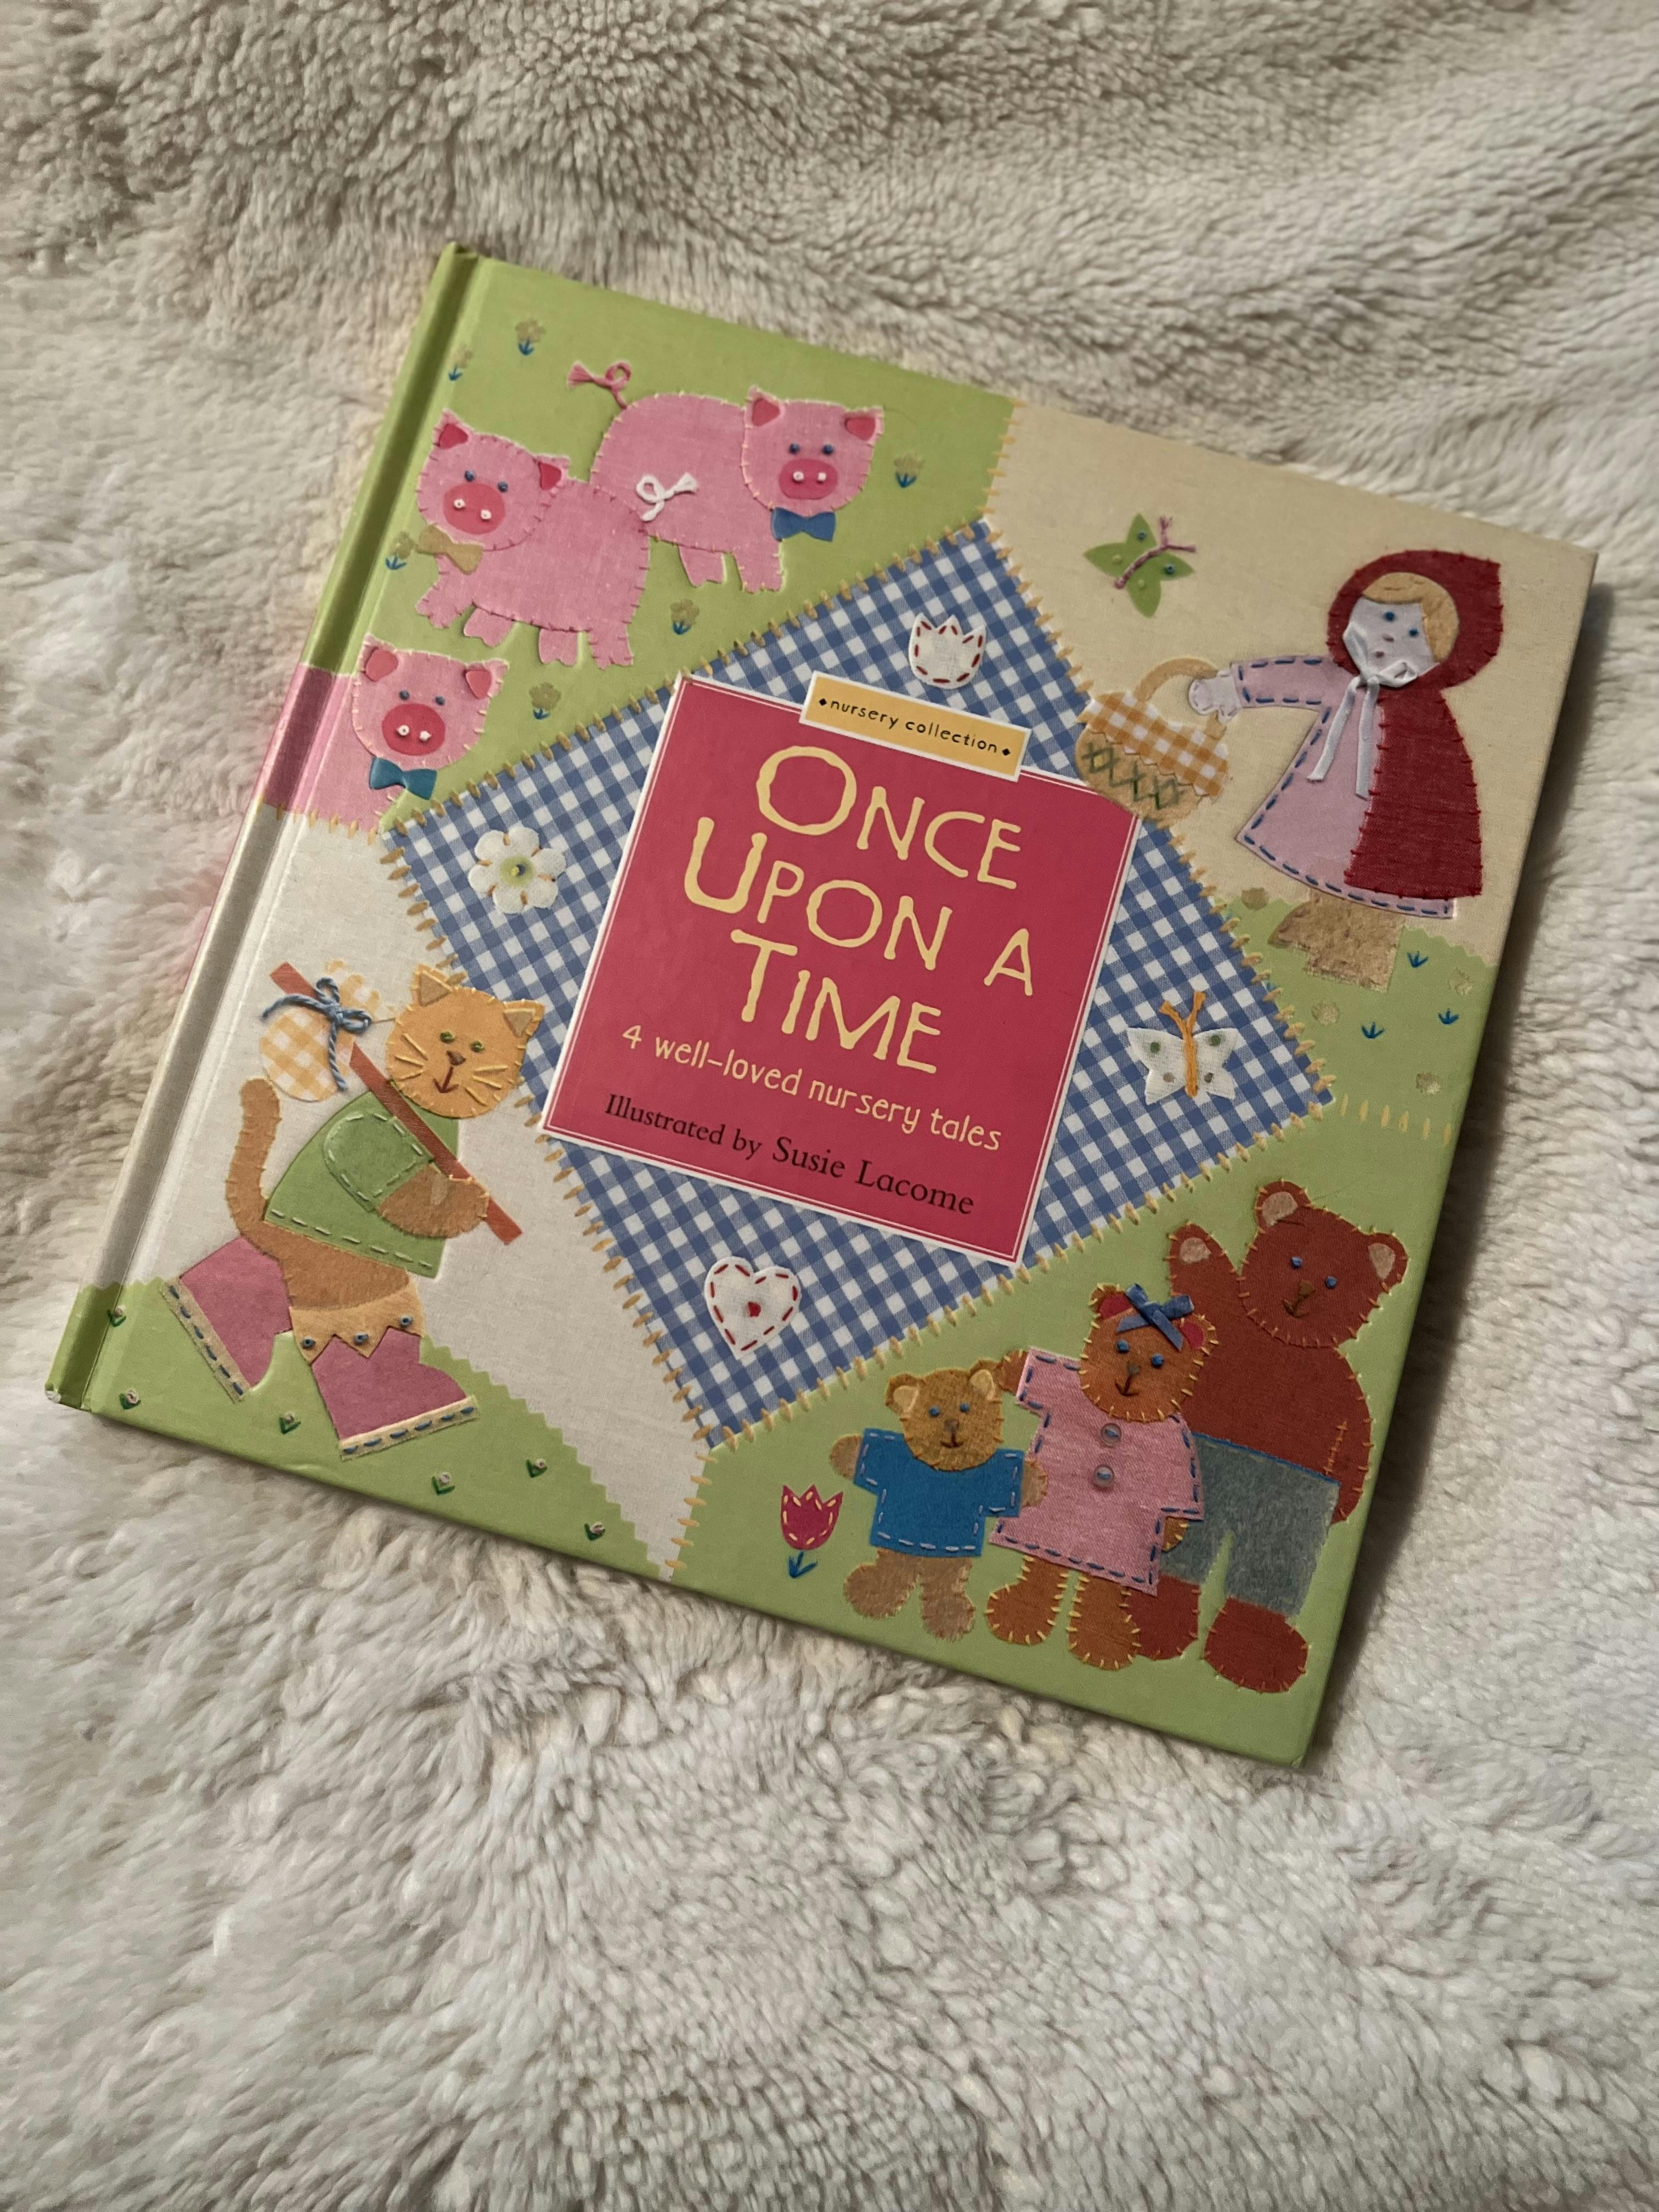 Once Upon A Time Illustrated by Susie Lacome